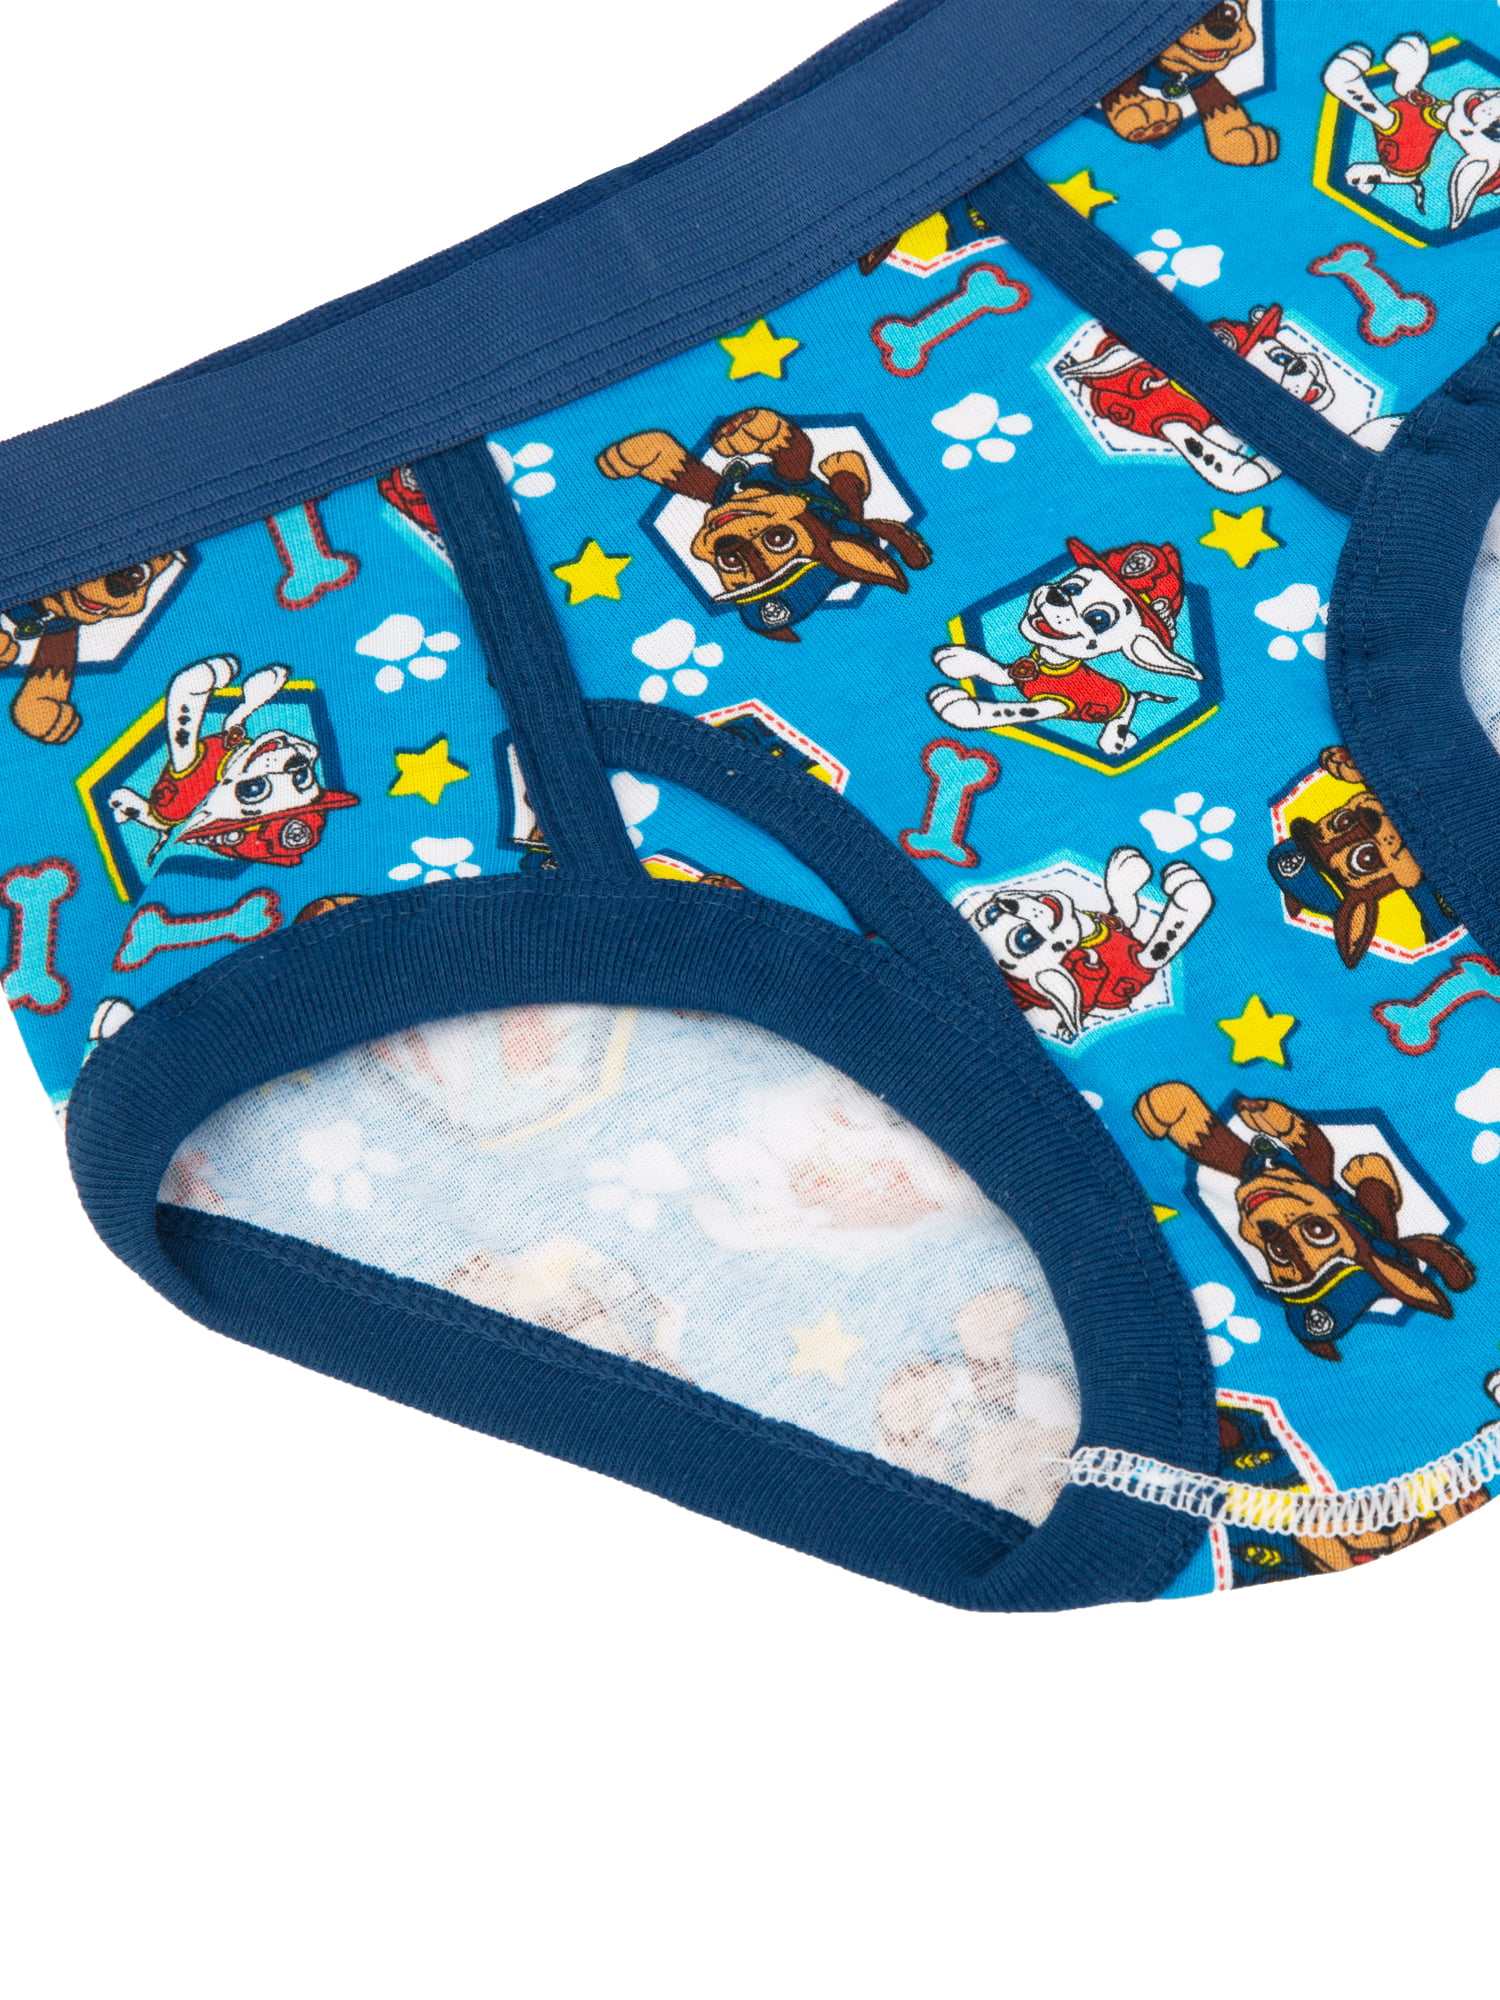 Boys Paw Patrol 5 Pack Character Underwear, Size 4-6 